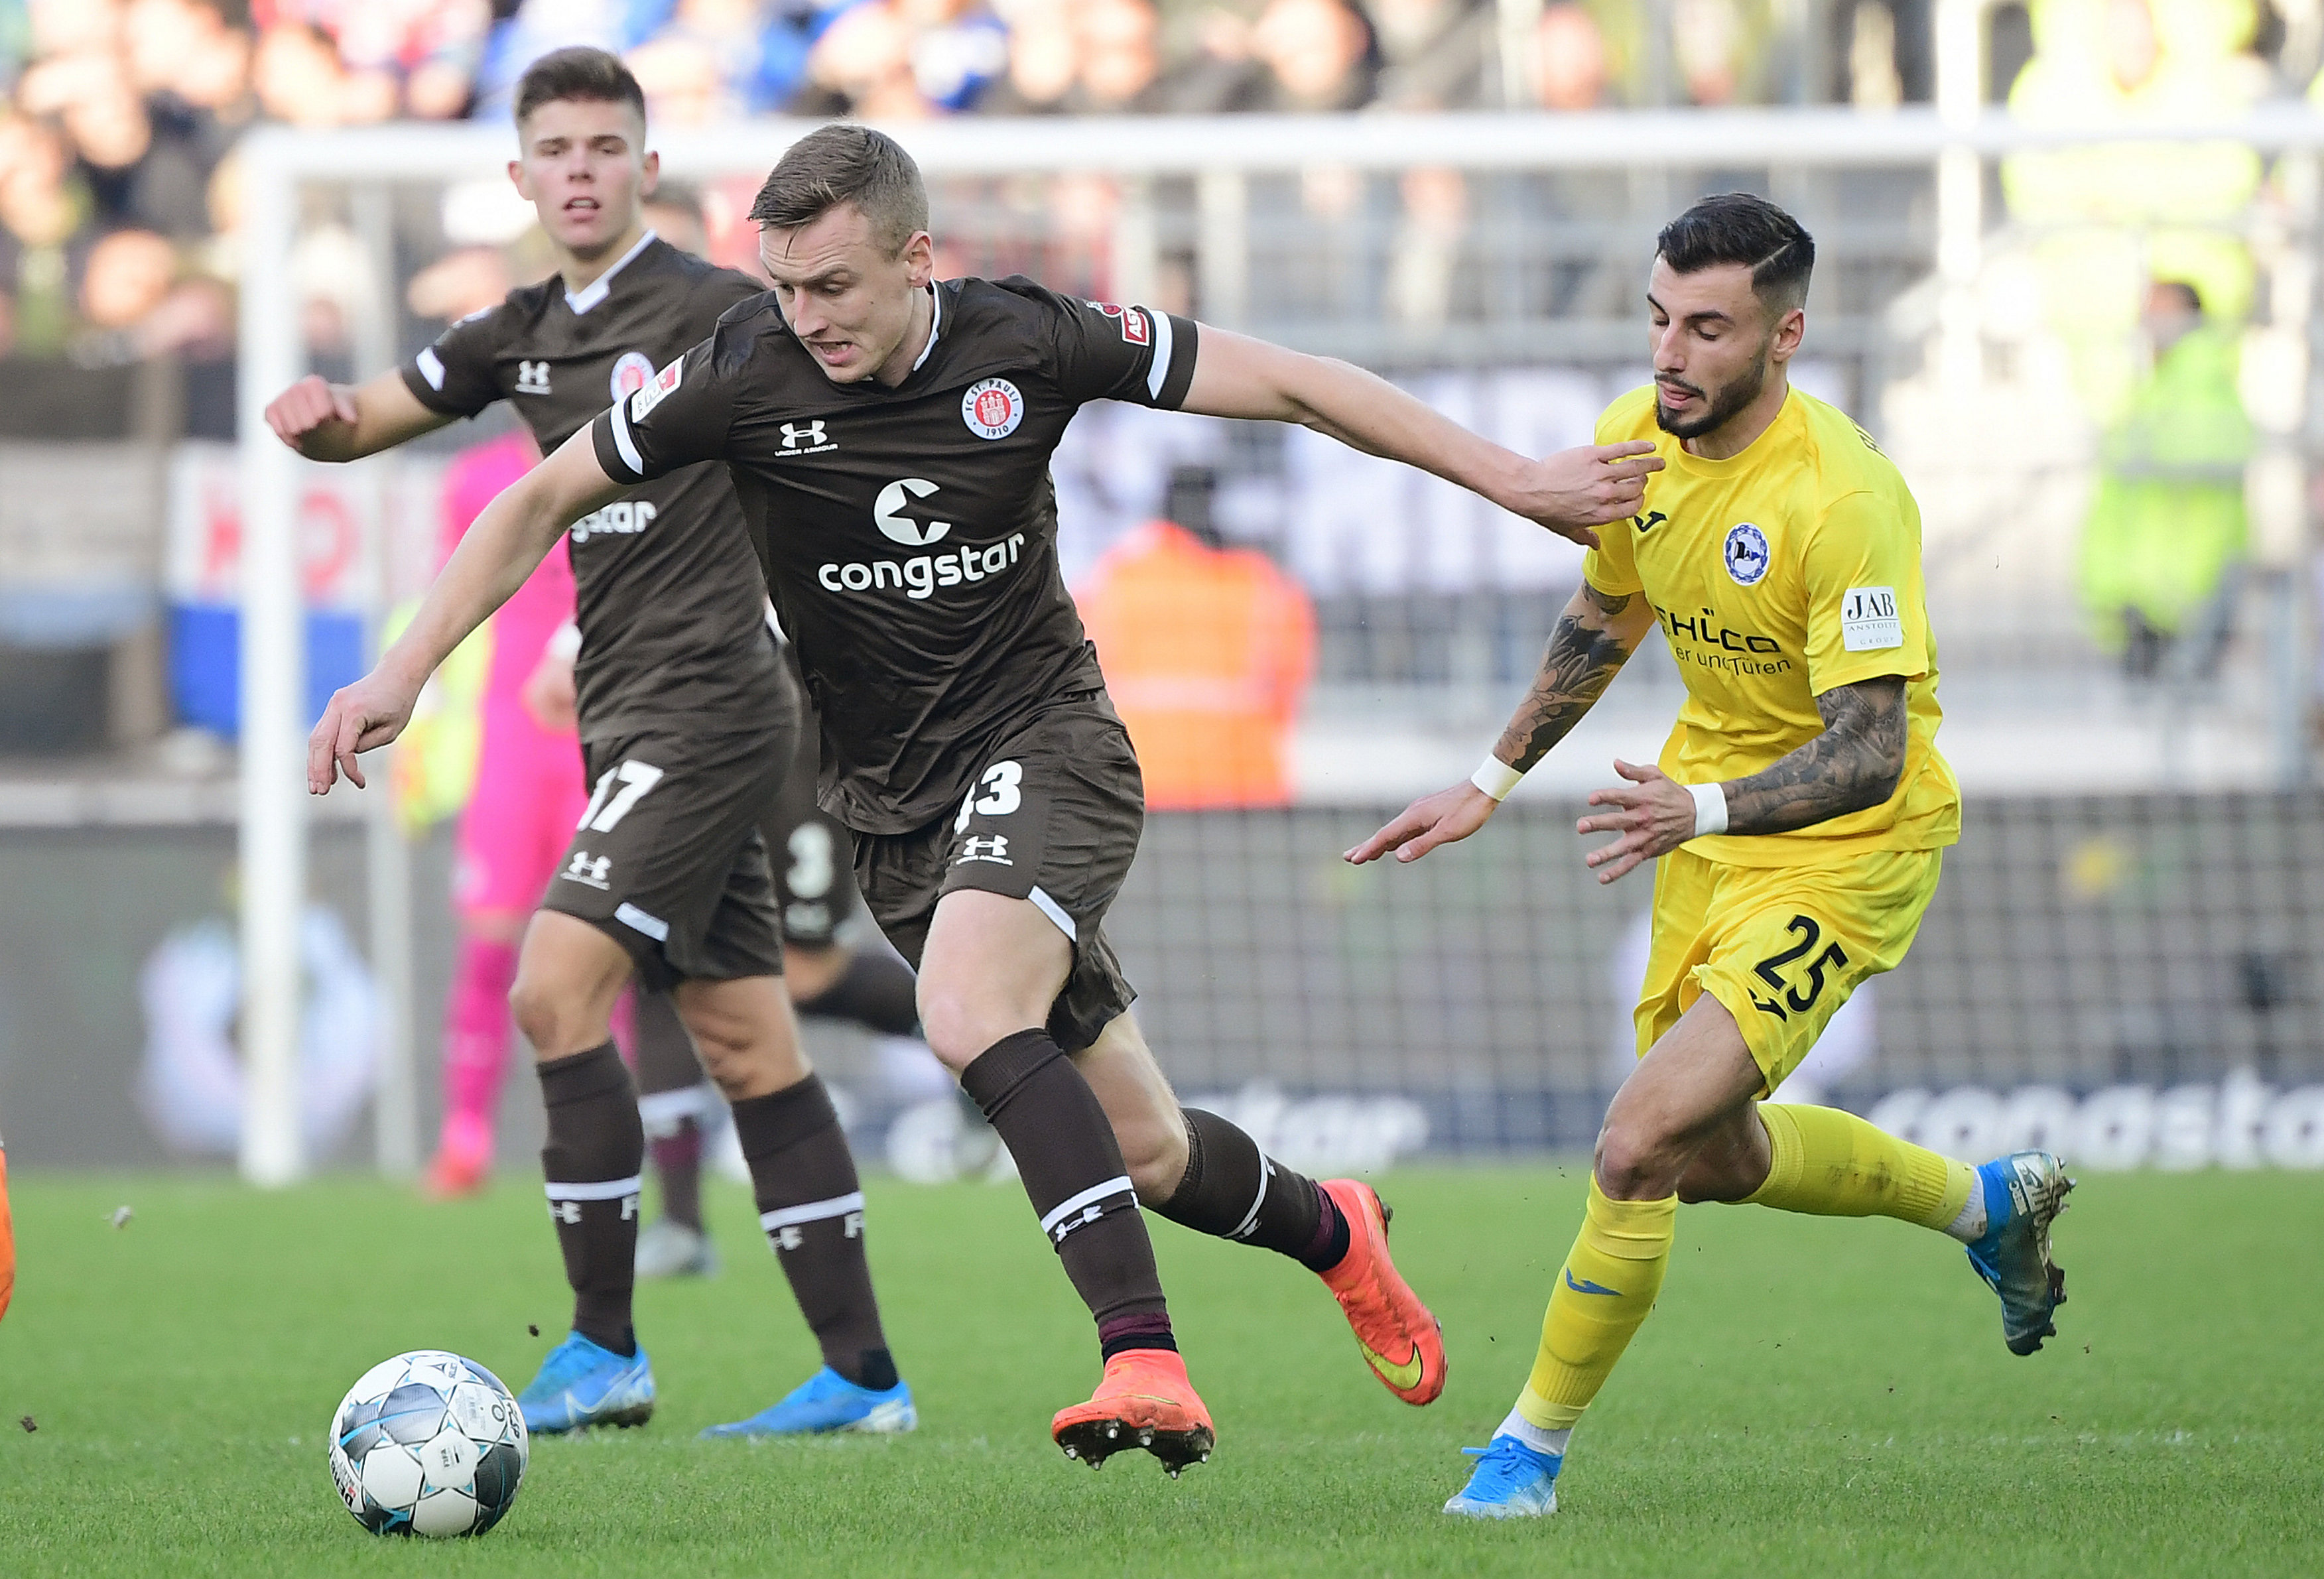 Sebastian Ohlsson has impressed throughout the season, not just in the final game of the year against Arminia Bielefeld.